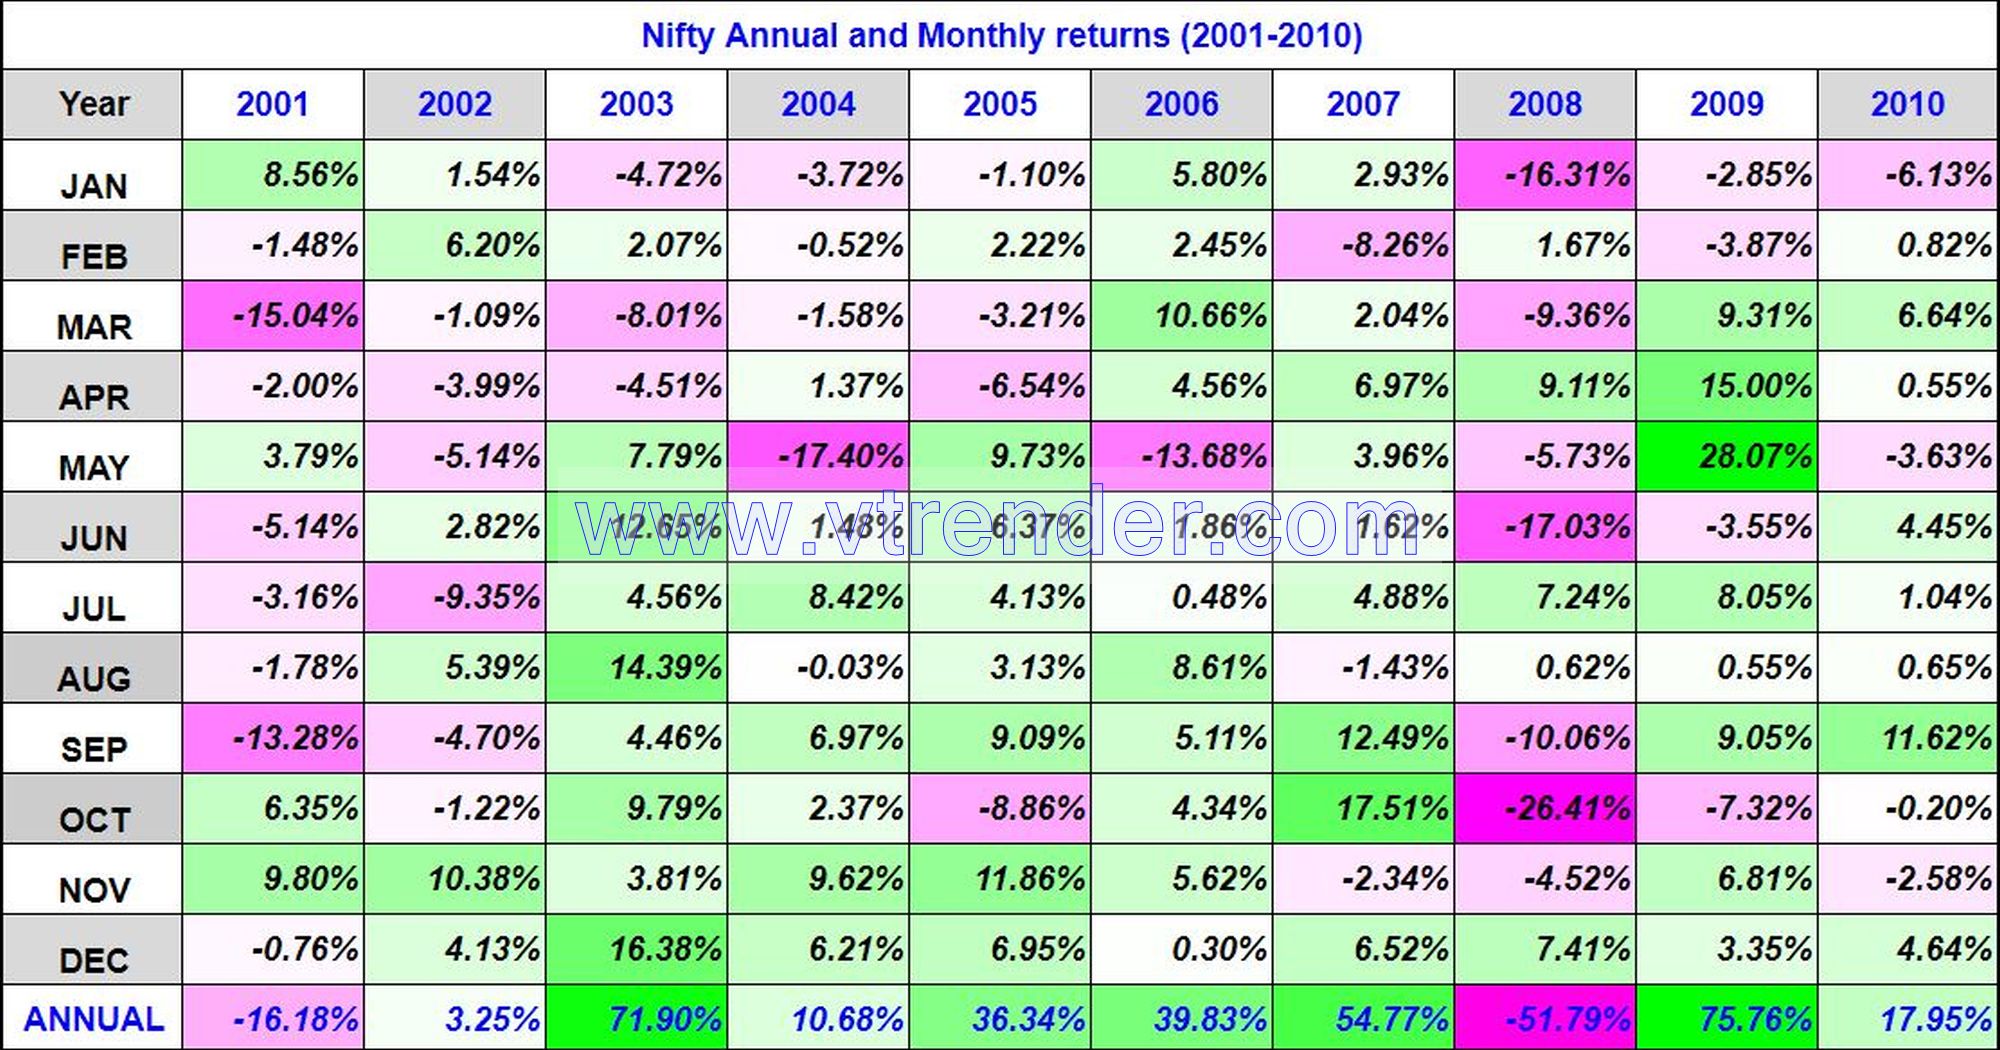 Niftyreturns2001 2010 Nifty 50 Monthly And Annual Returns (1991-2023) Updated 13Th Apr 2023 Annual, Monthly, Nifty Returns